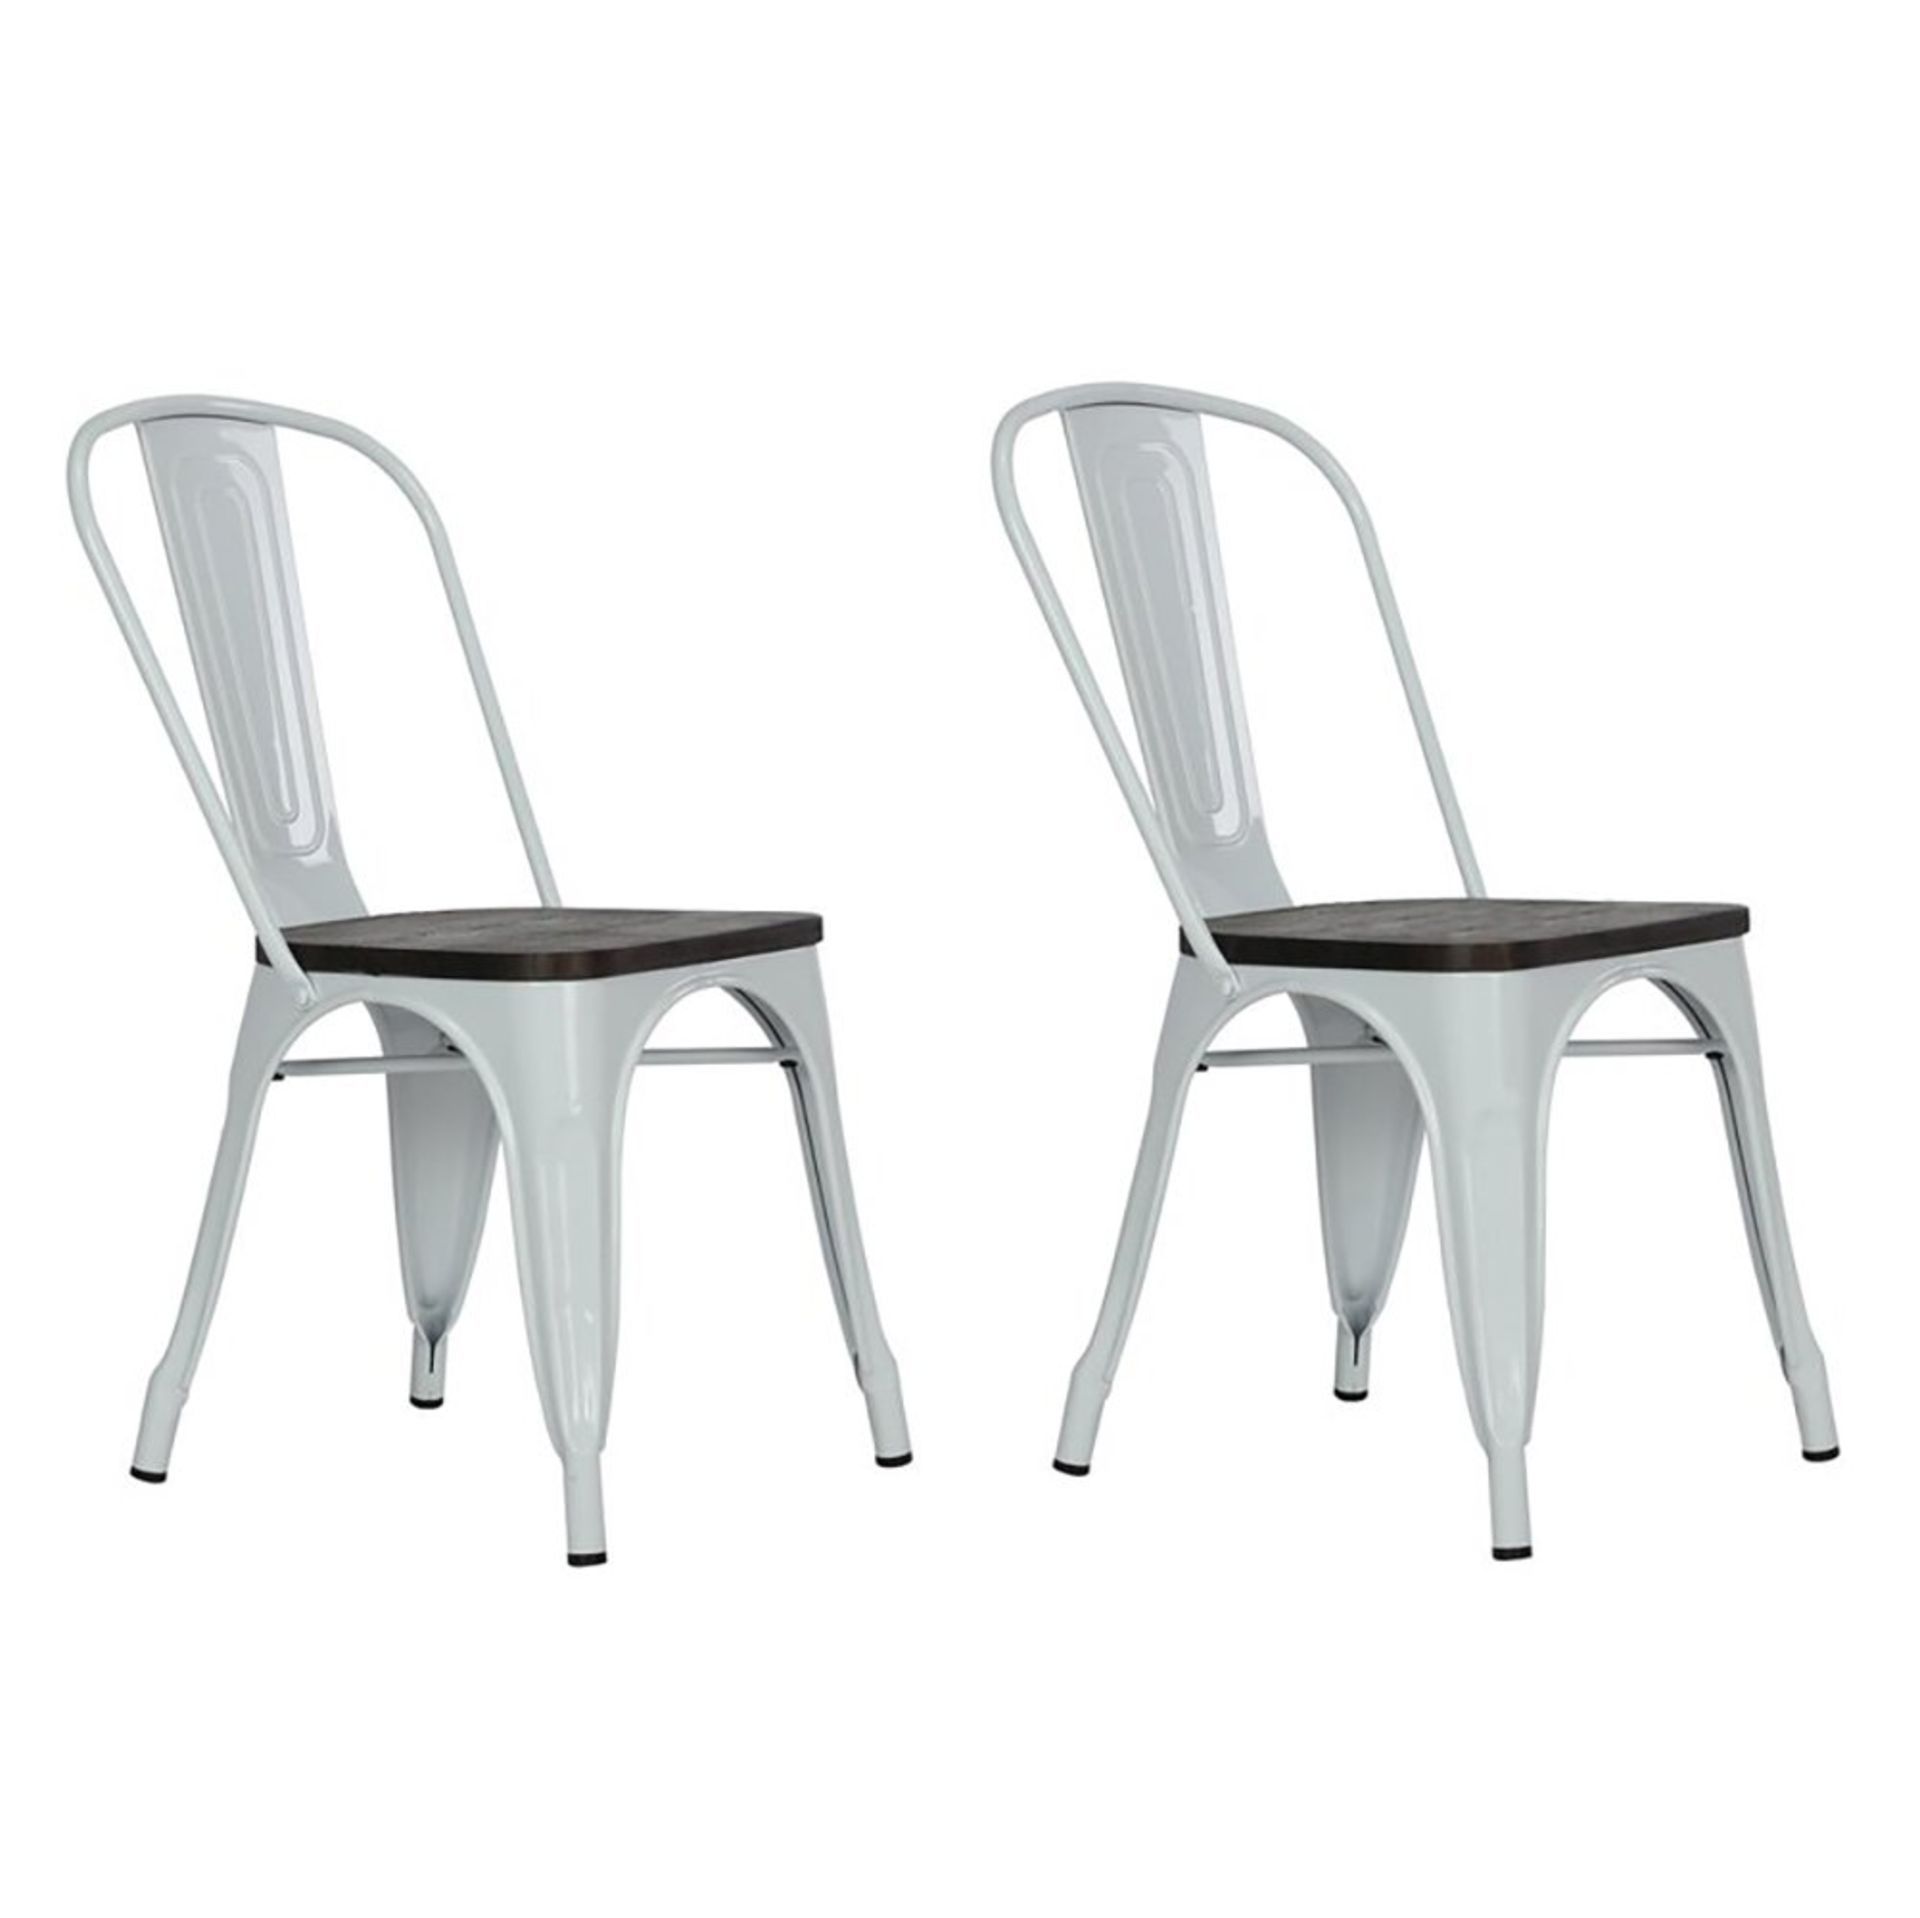 2 X Brand New Fusion Metal Dining Chair Antique White, Enchant your guests with the Fusion Metal